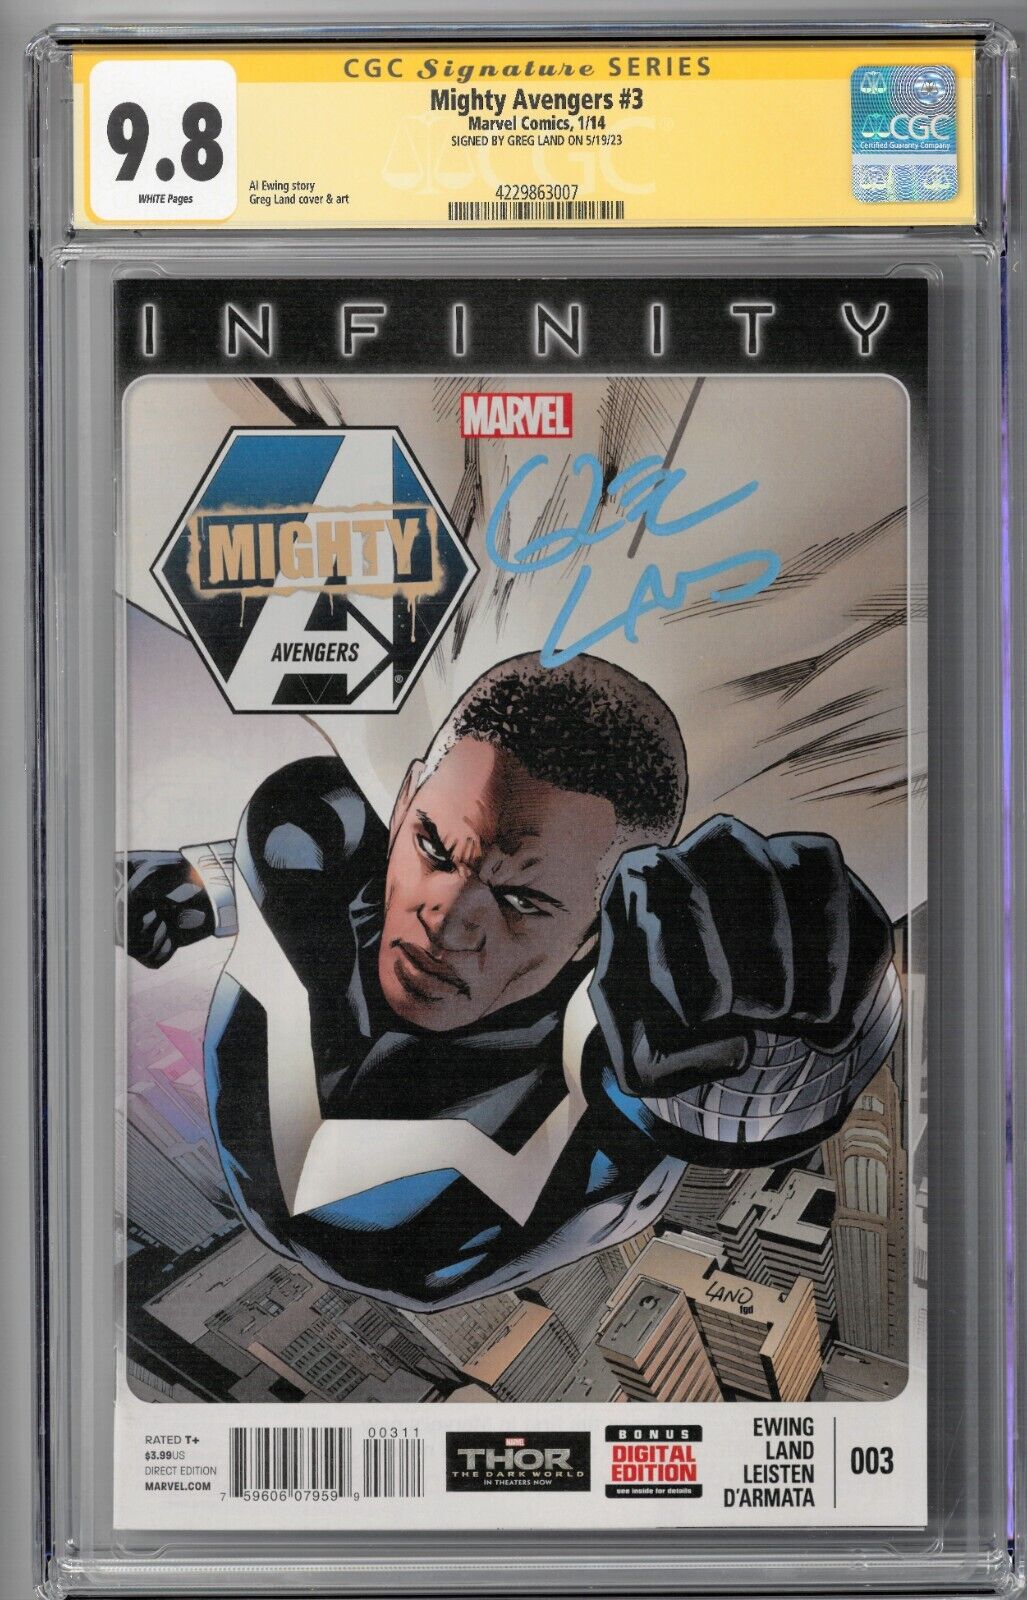 Mighty Avengers #3 CGC SS 9.8 (Jan 2014 Marvel) Signed by Greg Land, White Tiger